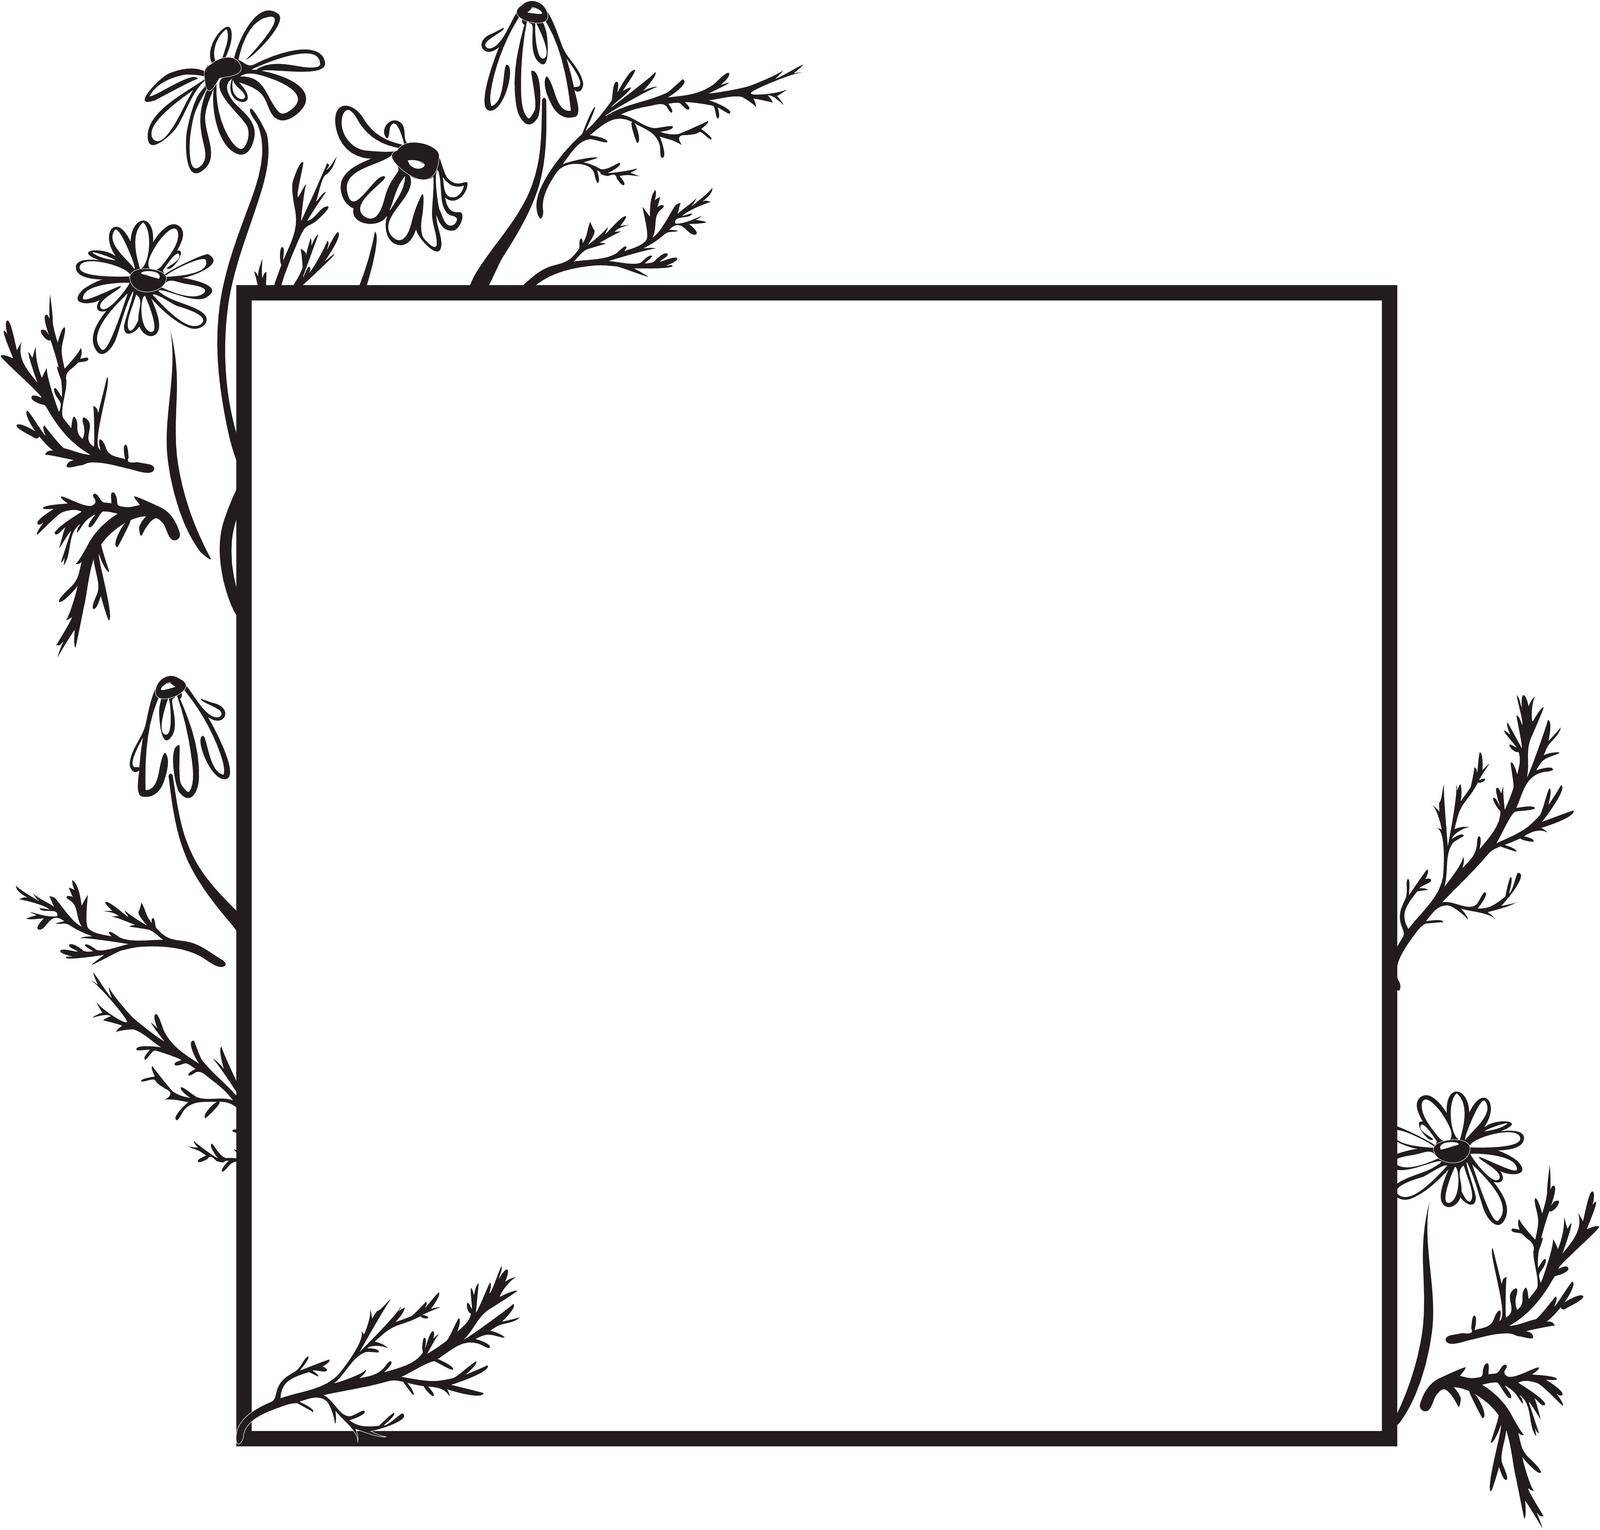 medical chamomile - a plant used for herbal tea vector line art illustration with frame